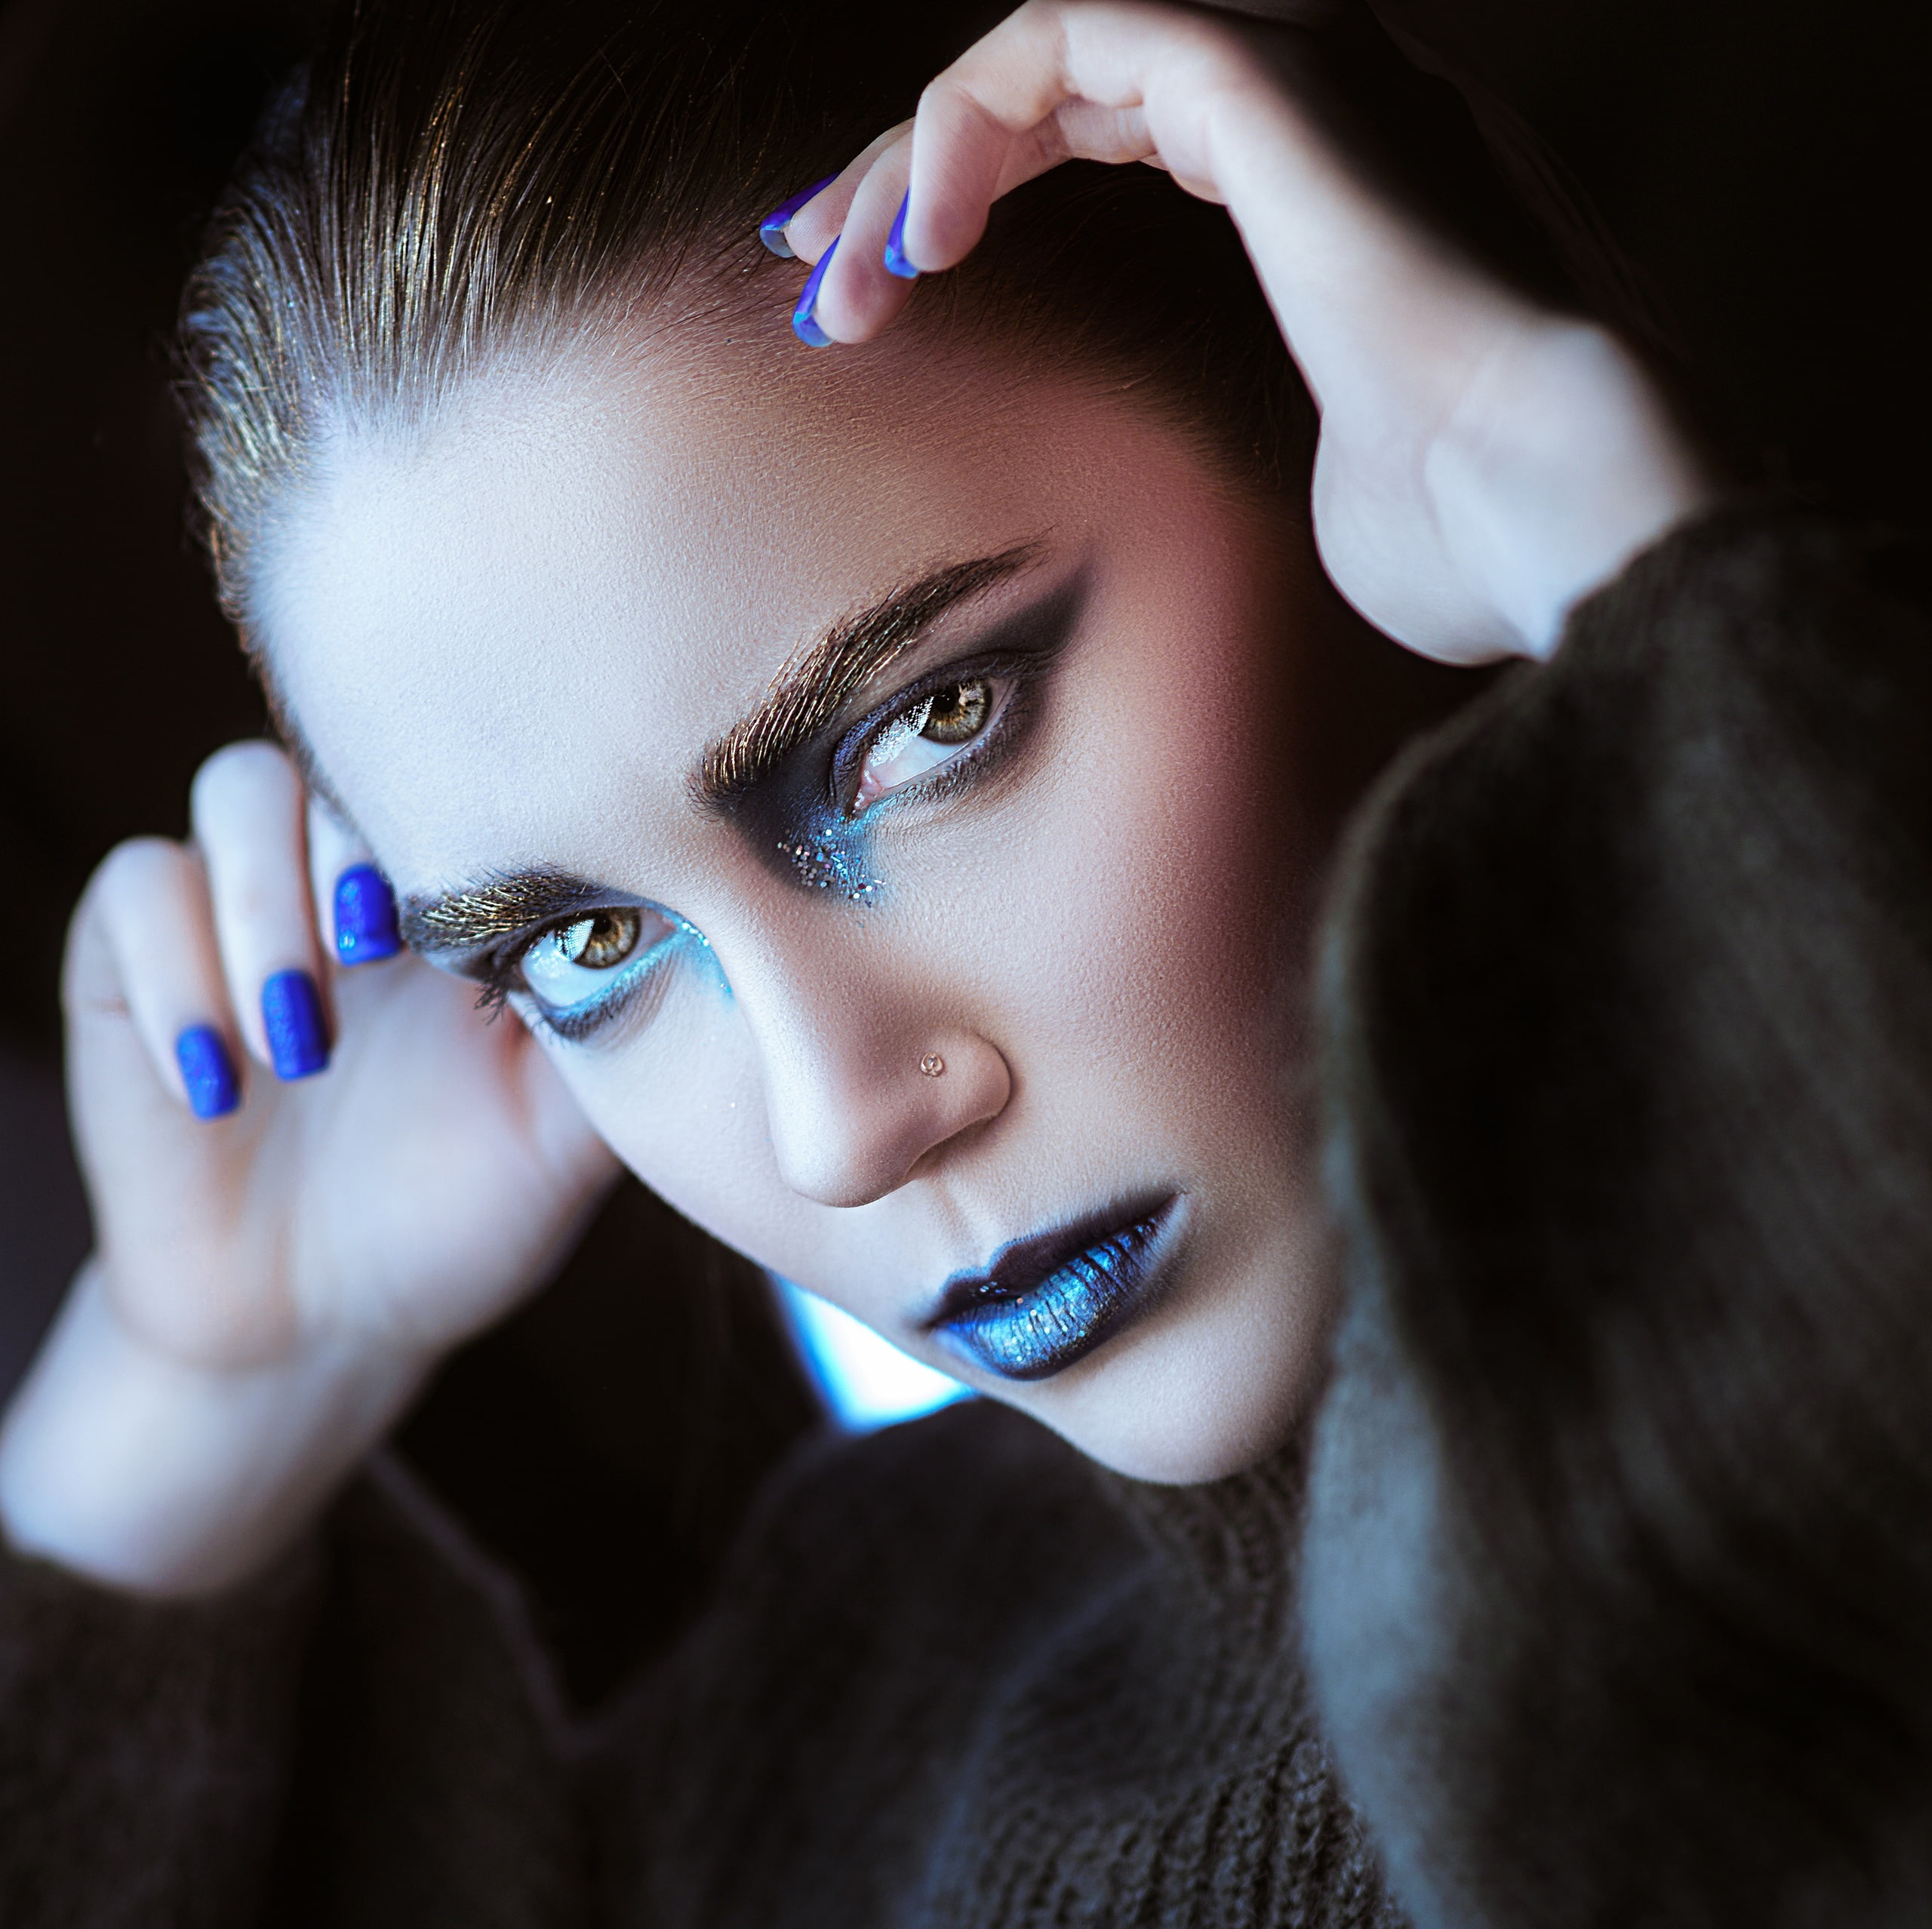 makeup, painted nails, women, model, face, make-up, adult, human body part